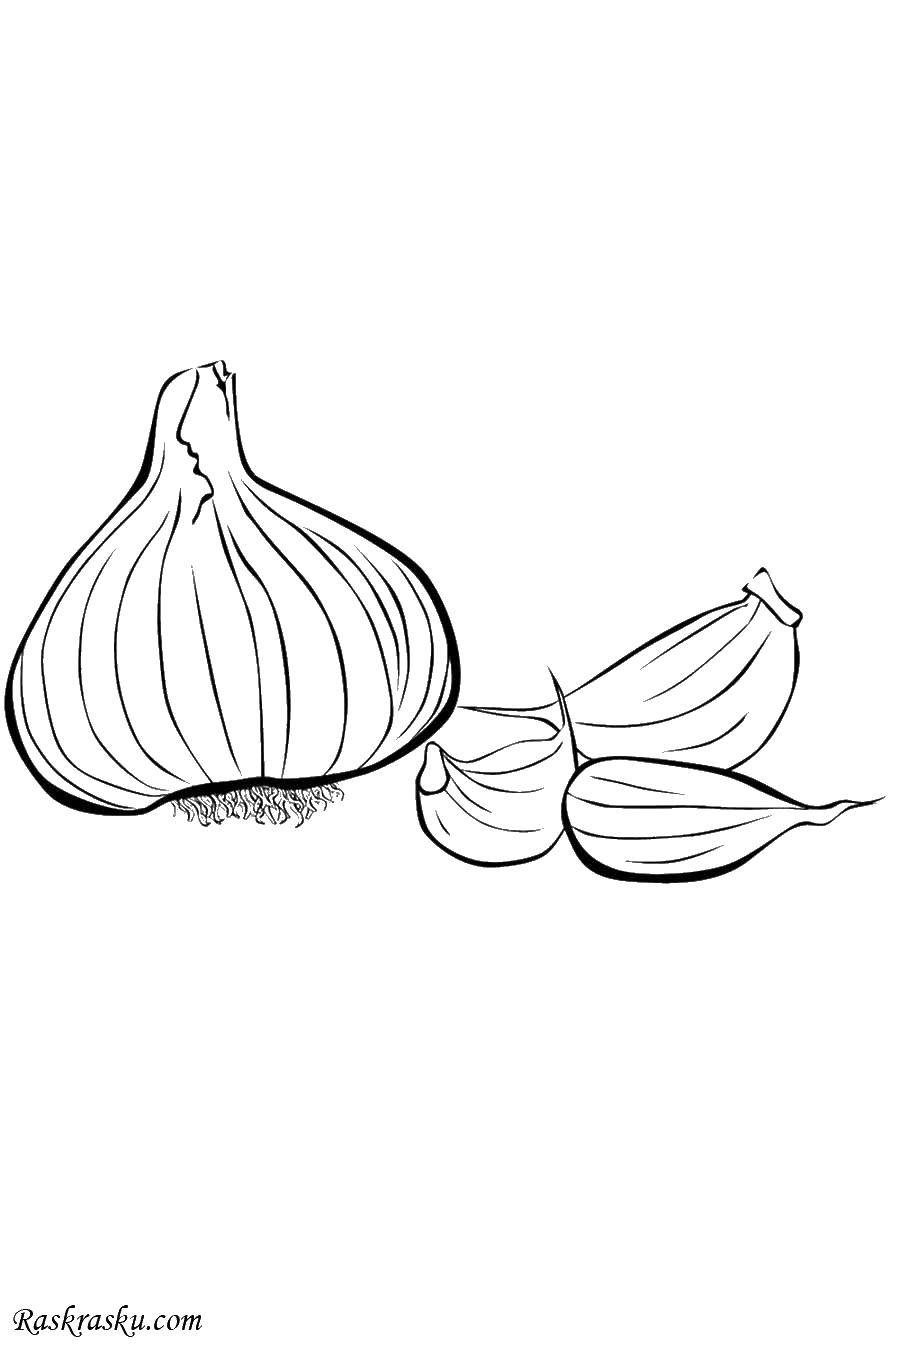 Coloring Garlic. Category vegetables. Tags:  Vegetables.